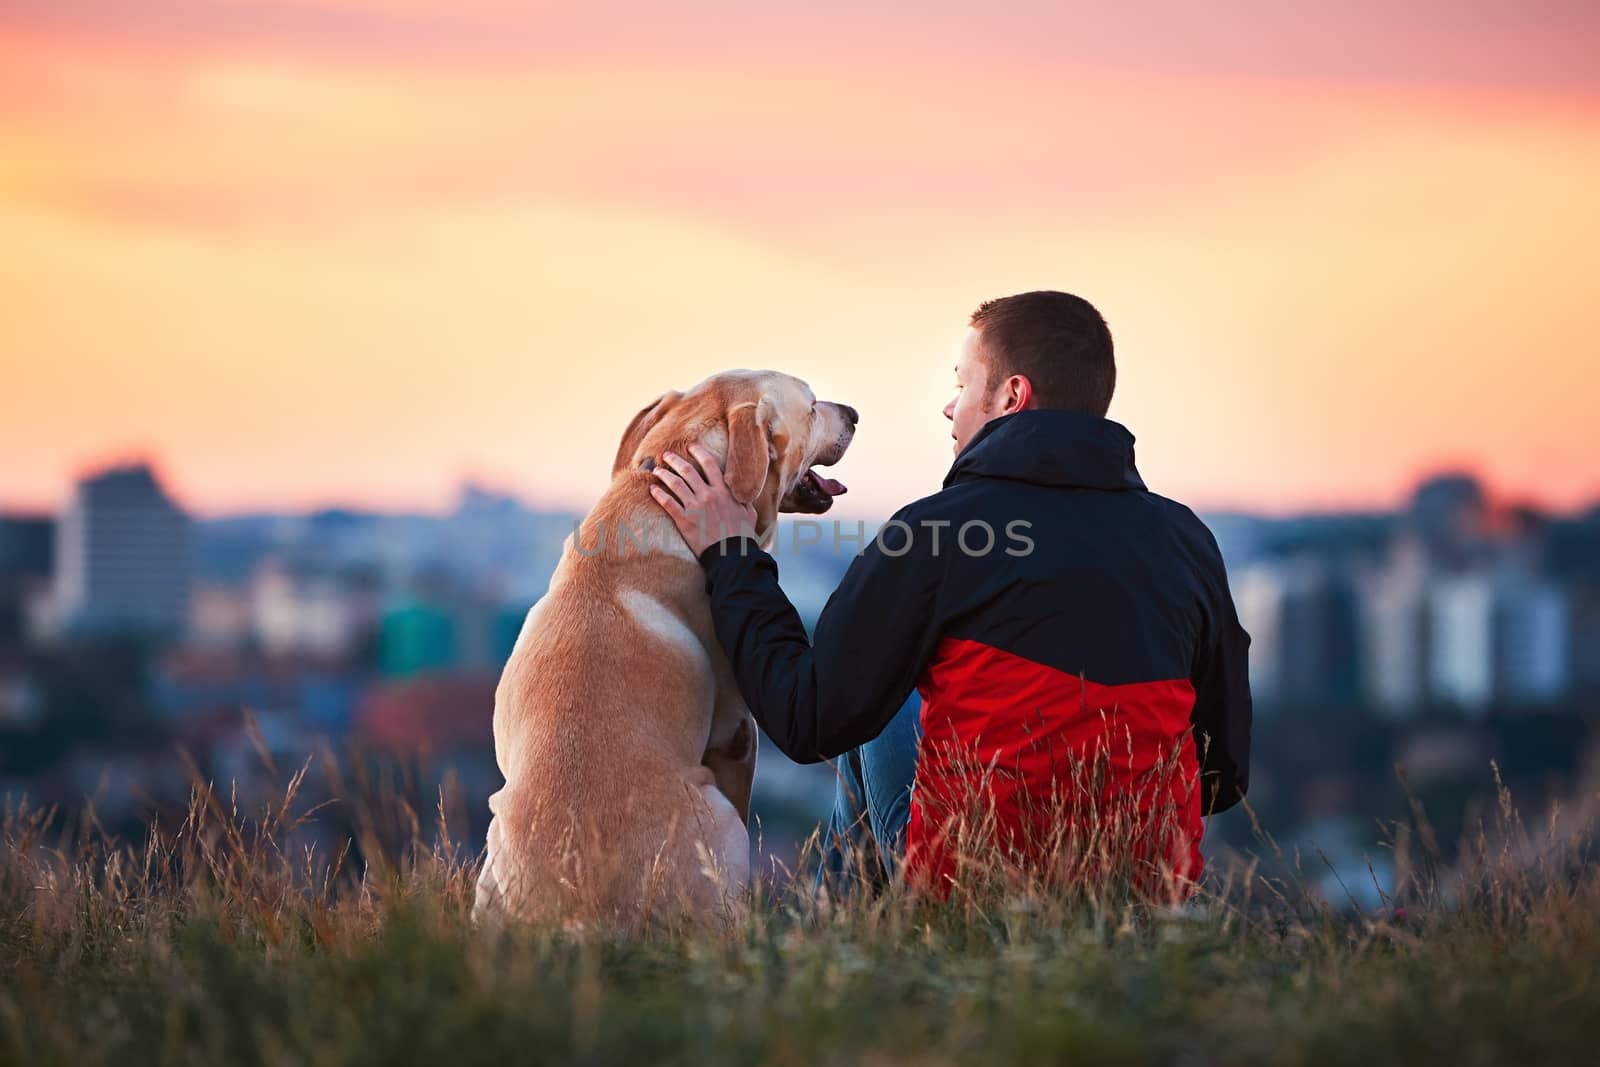 Enjoying sun. Man is caressing yellow labrador retriever. Young man sitting on the hill with his dog. Amazing sunrise in the city. Prague in Czech Republic.